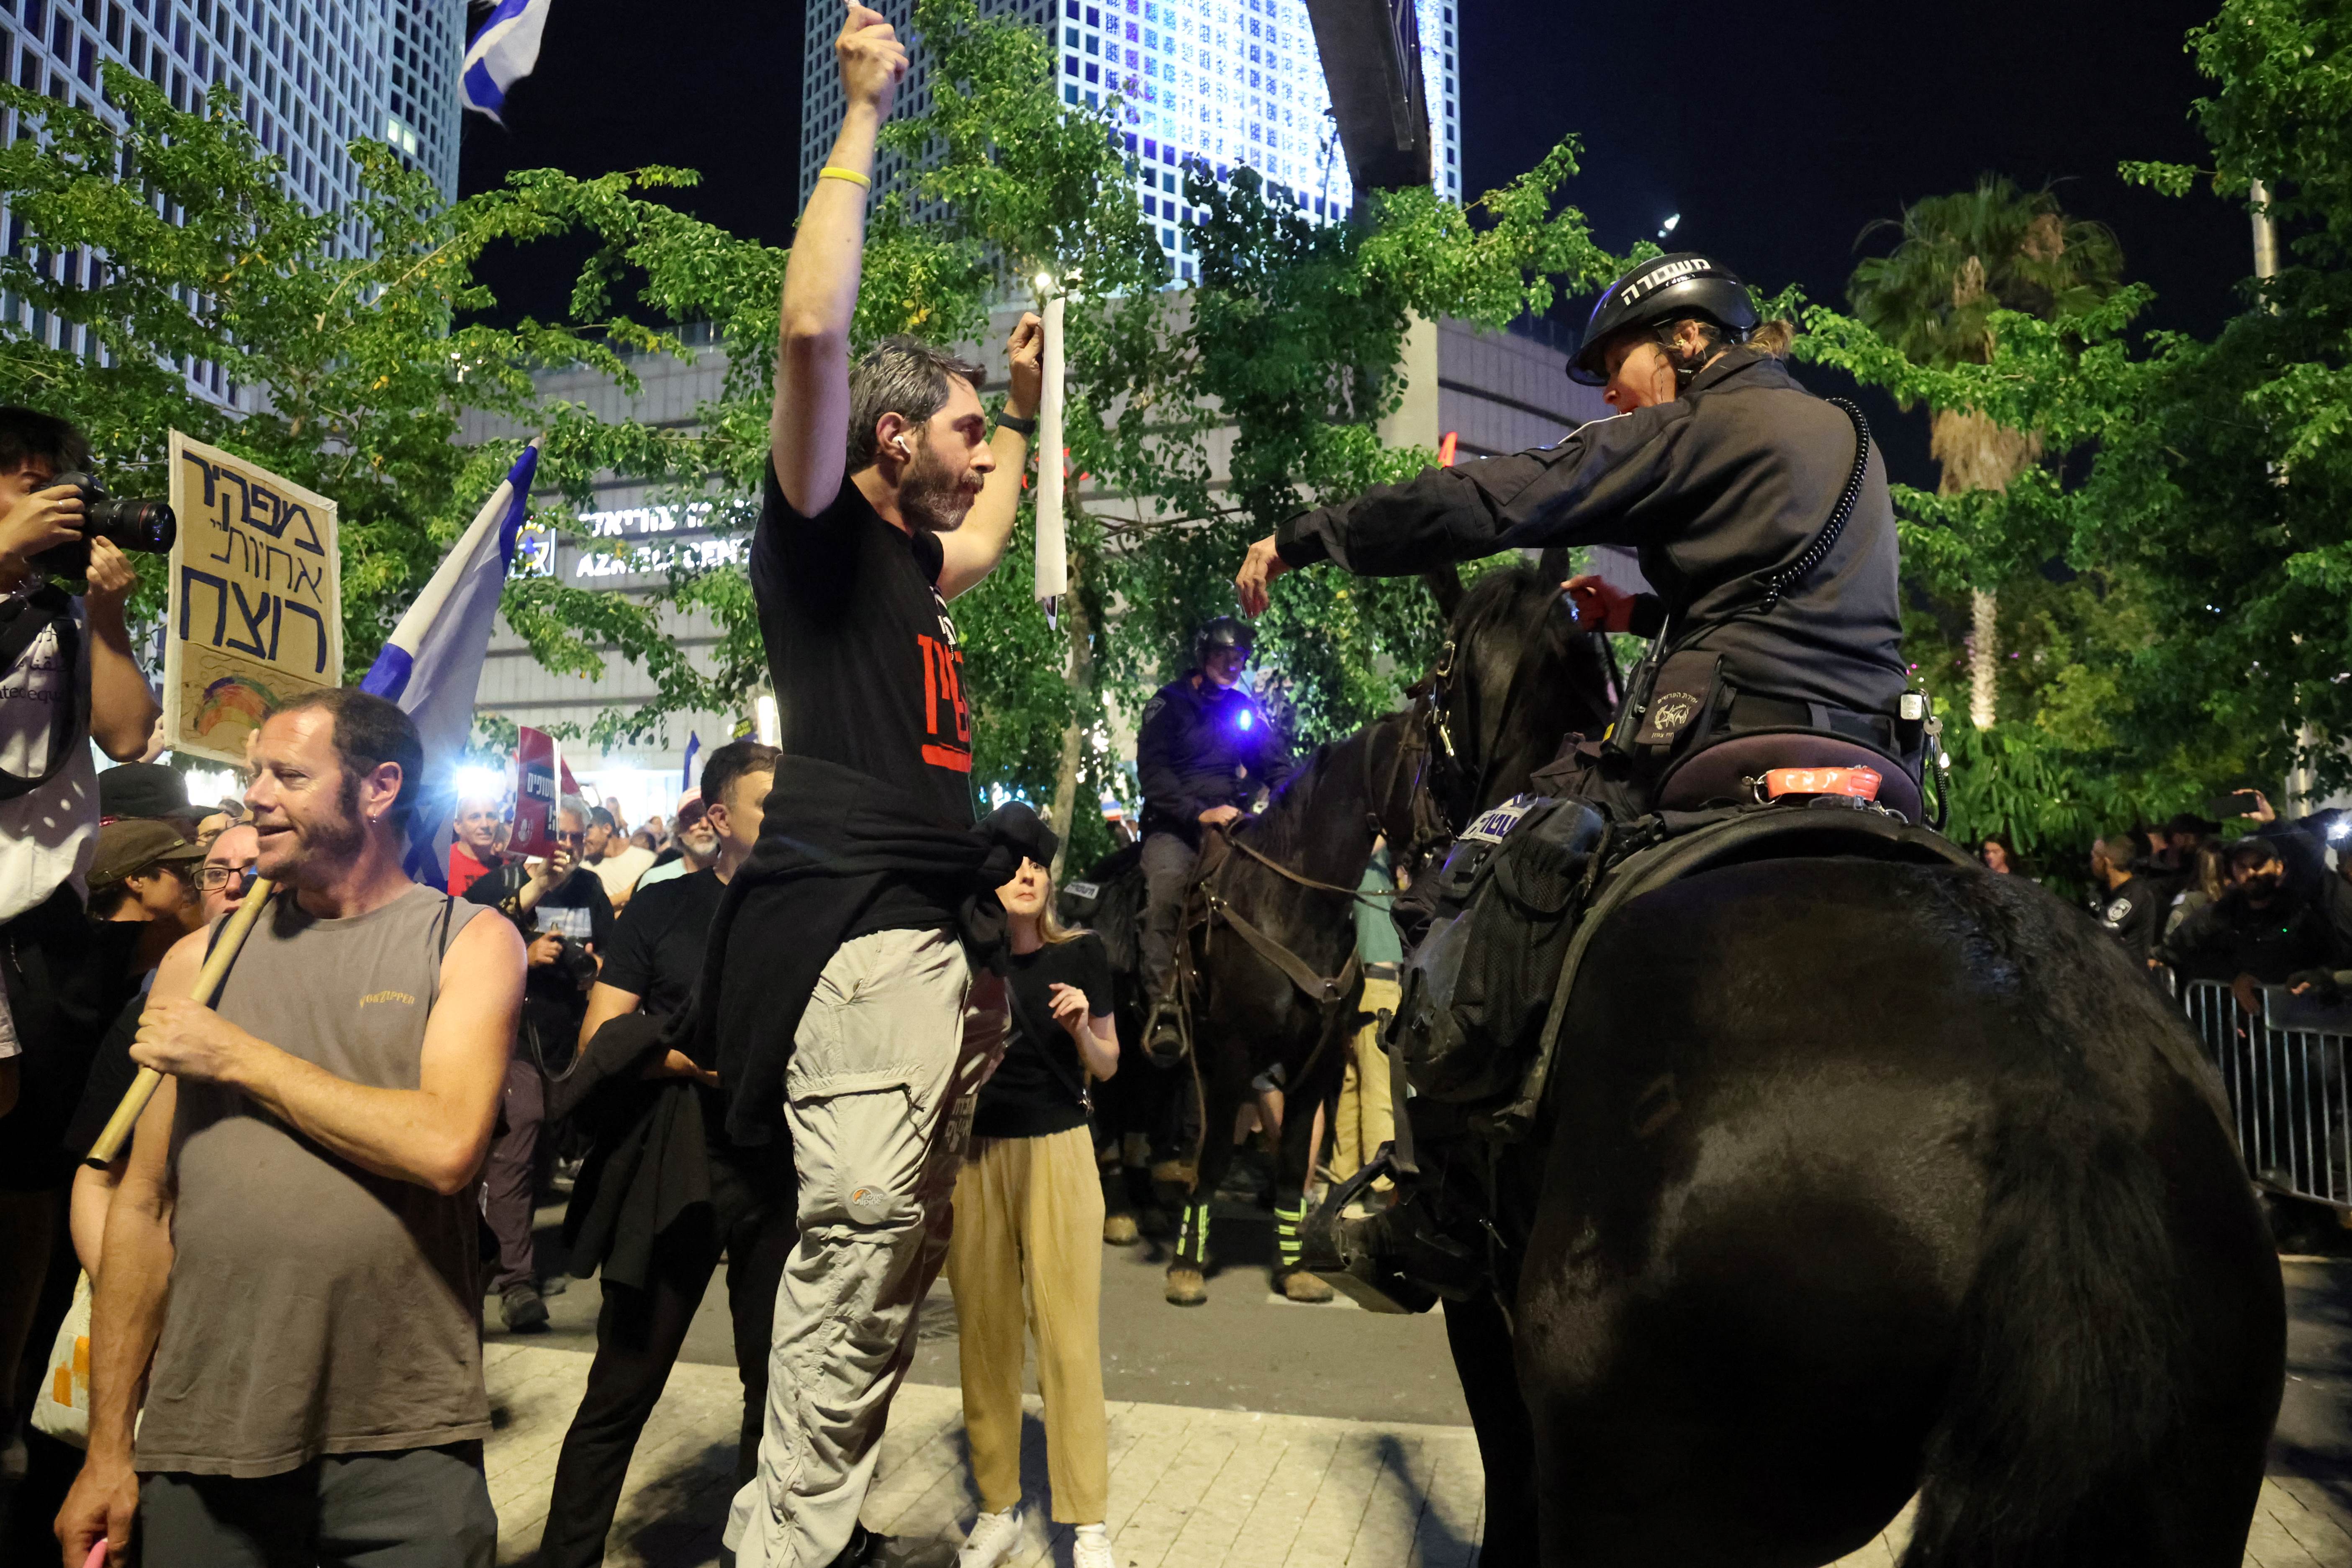 Israeli mounted police disperse anti-government protesters in Tel Aviv on 18 May (AFP/Jack Guez)